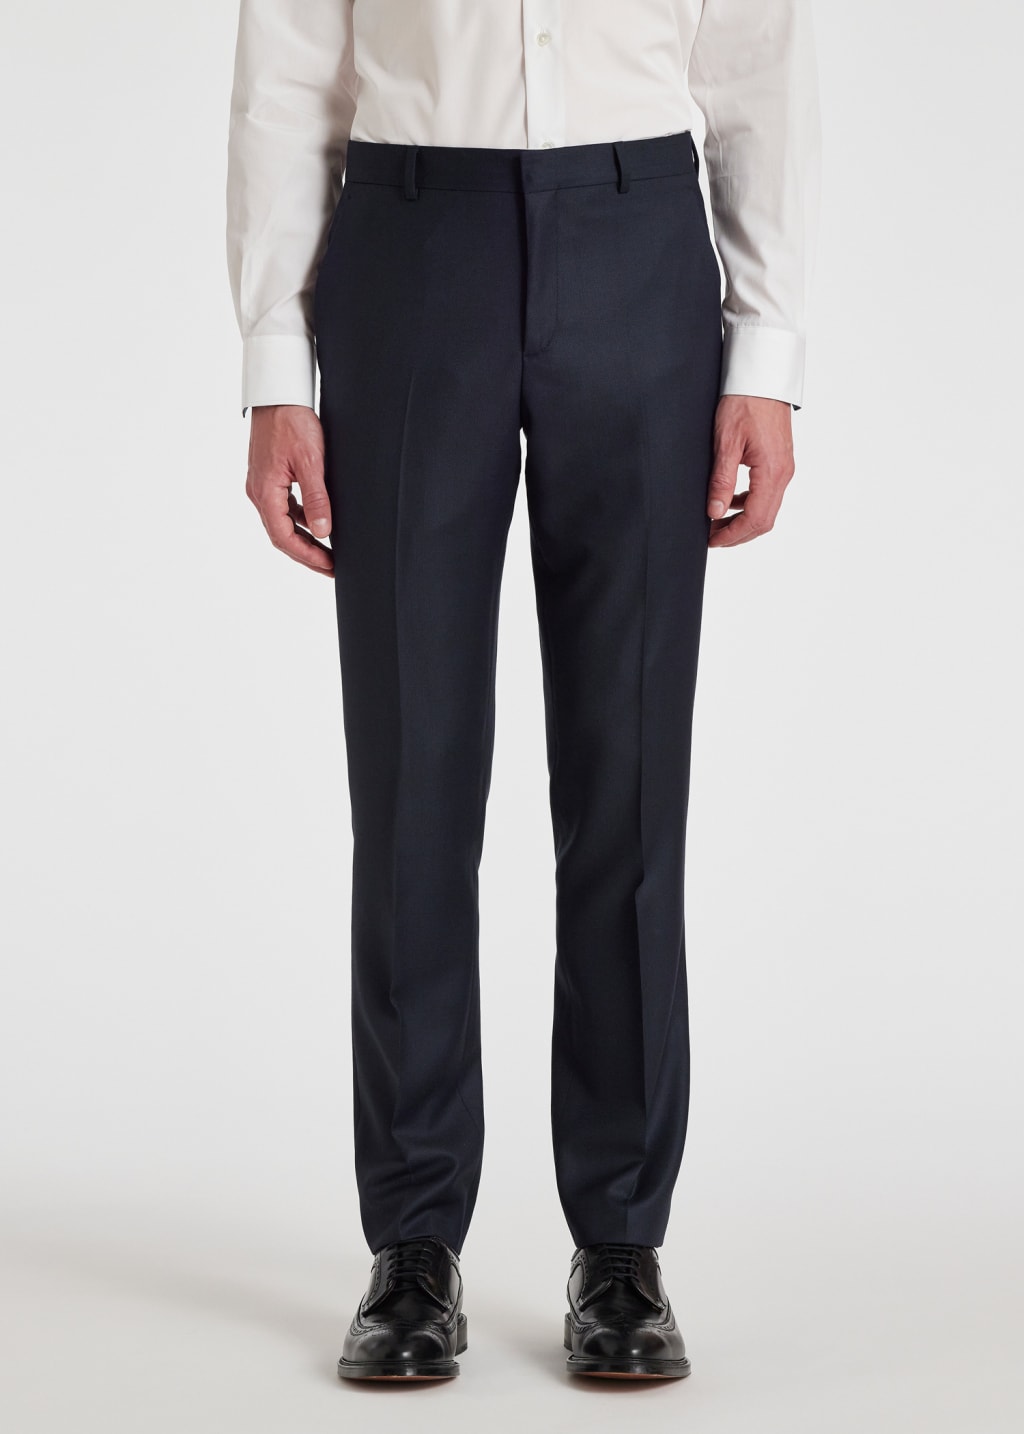 Model View - The Bloomsbury - Easy-Fit Navy Wool Birdseye Day Suit Paul Smith